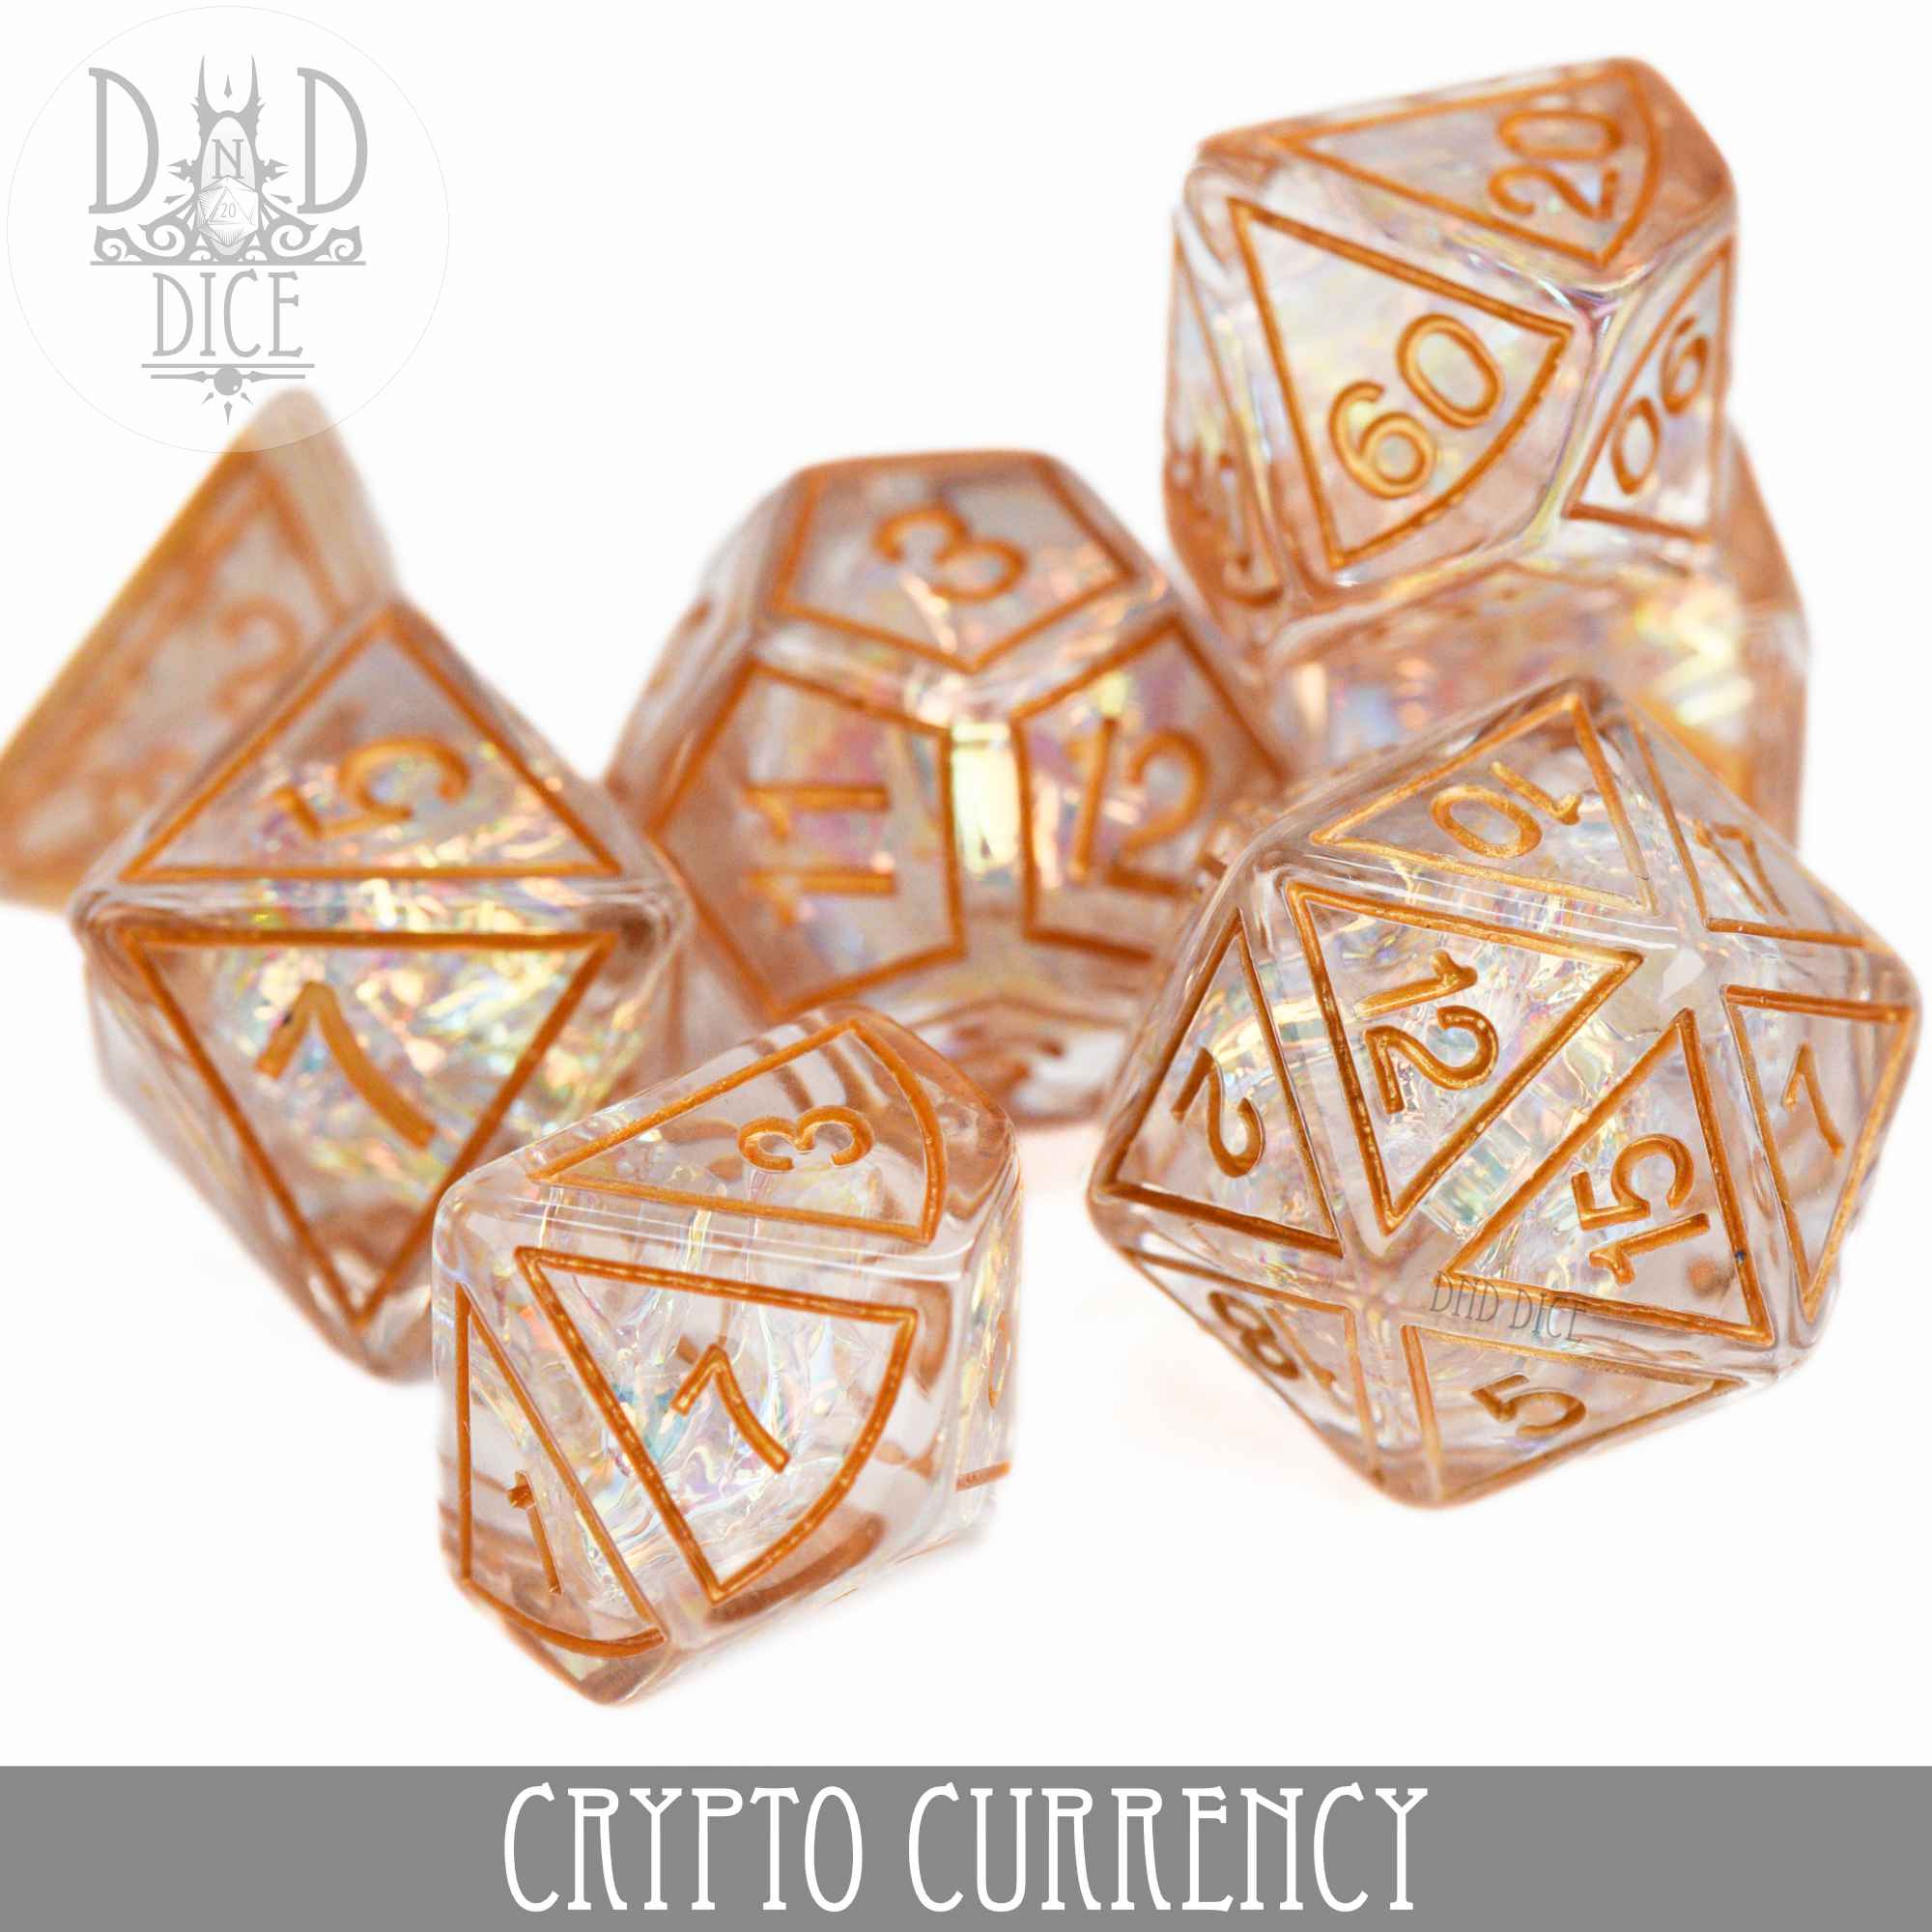 Crypto Currency Dice Set